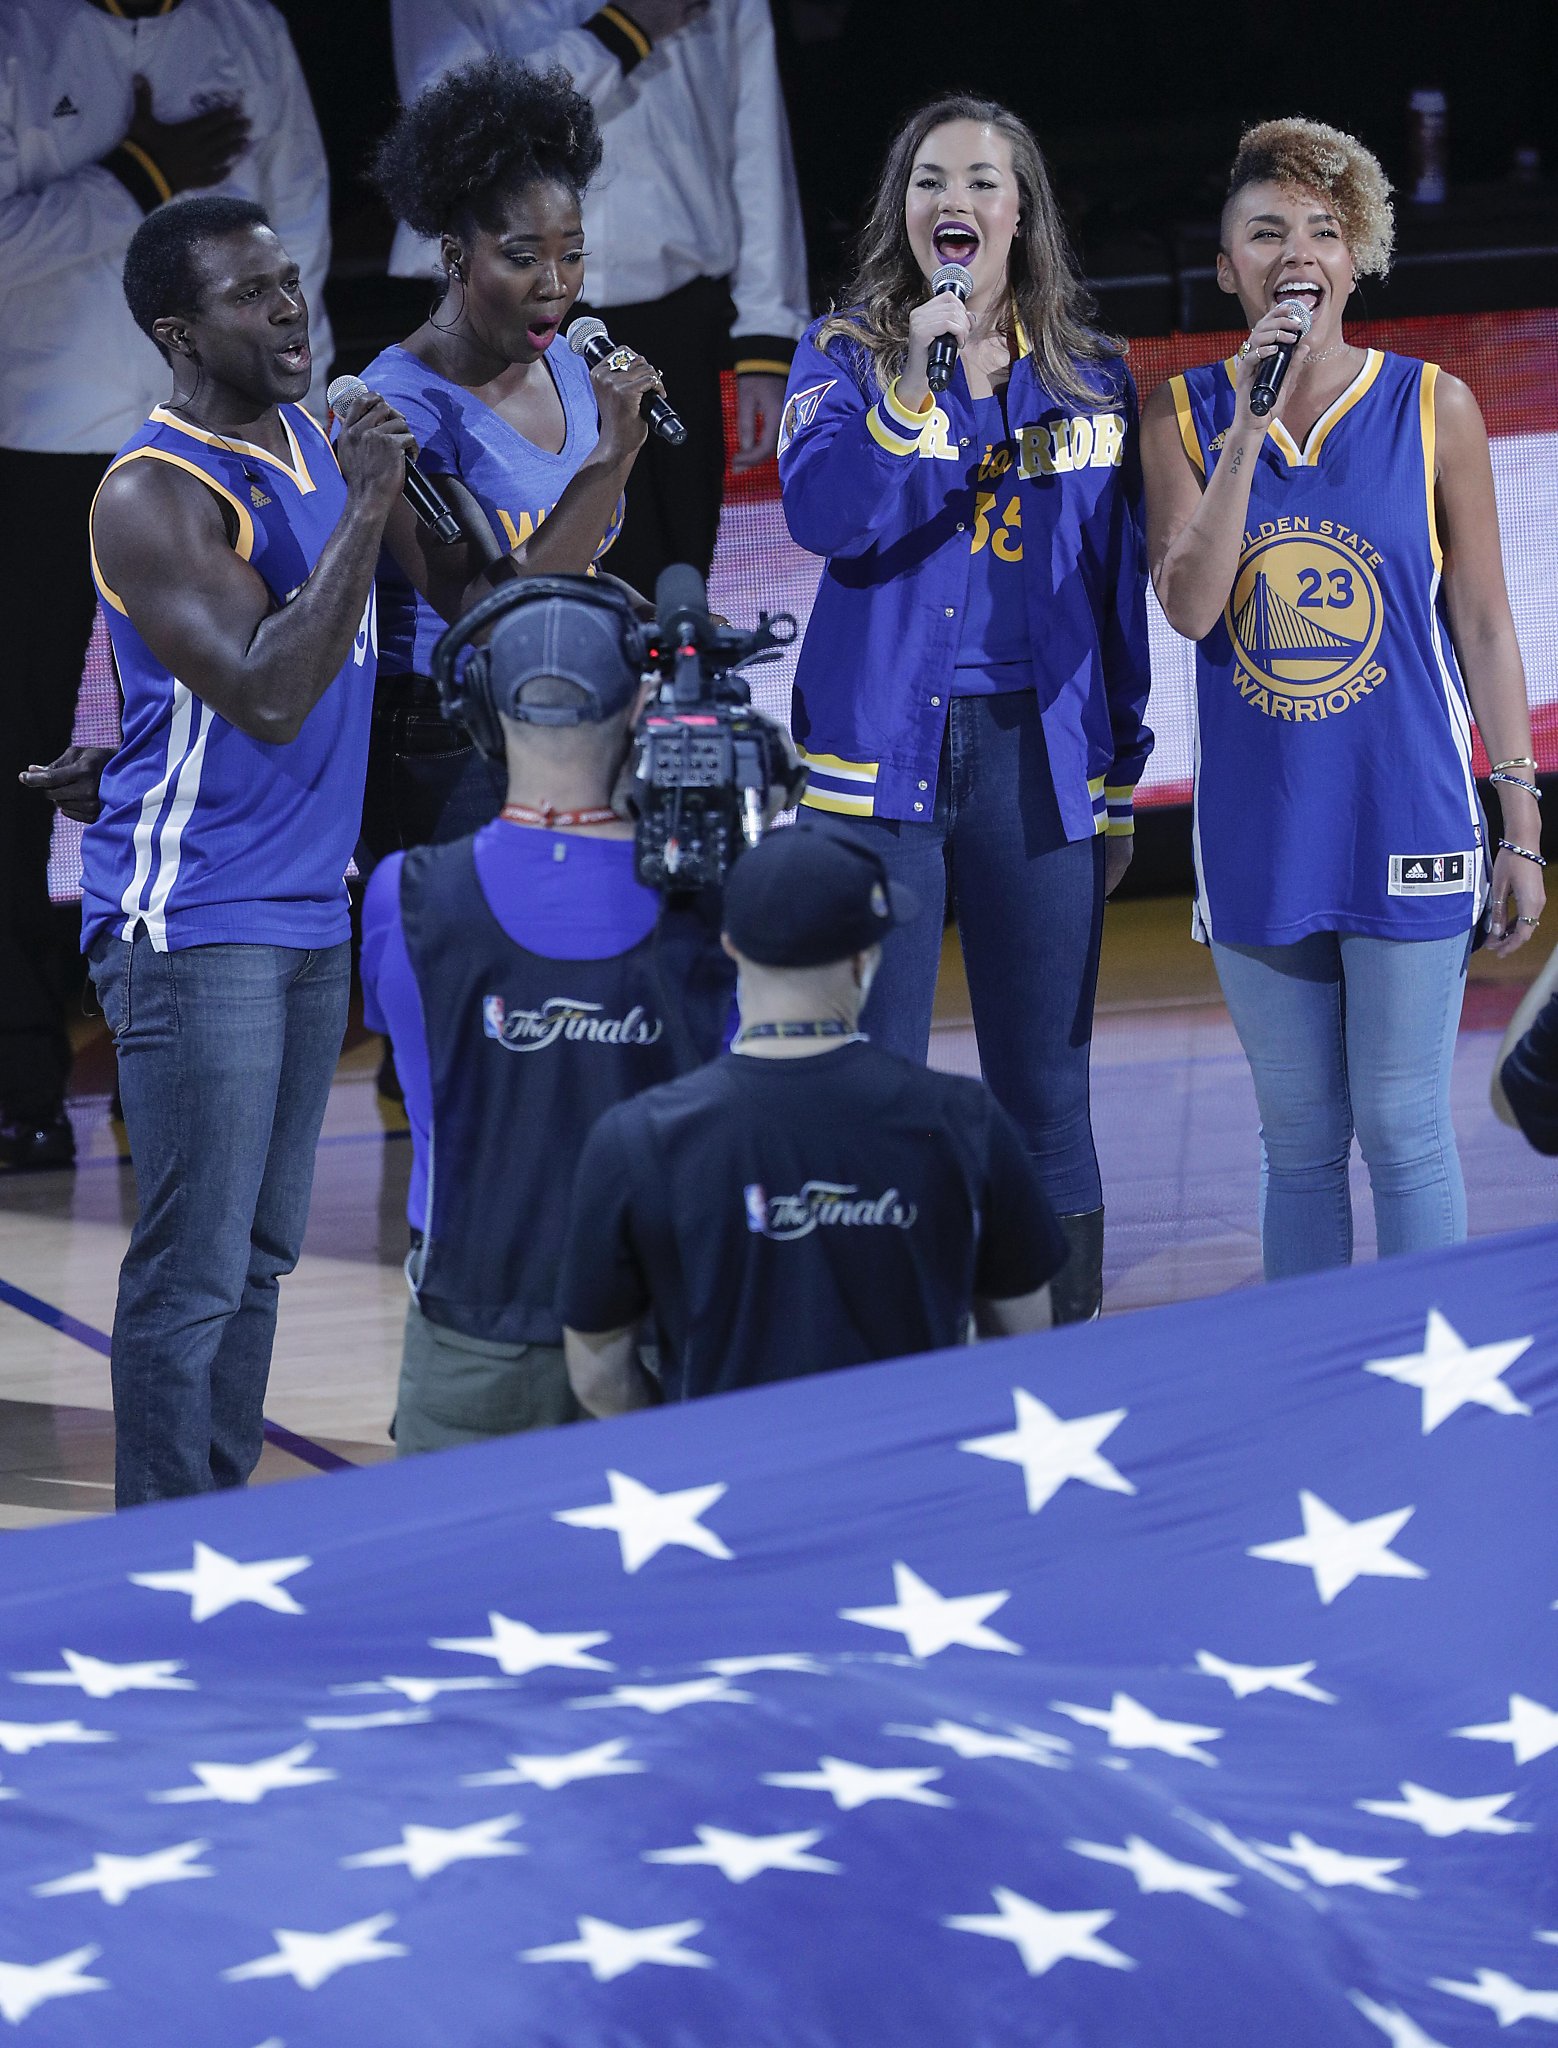 Watch SF 'Hamilton' cast members sing national anthem at Game 5